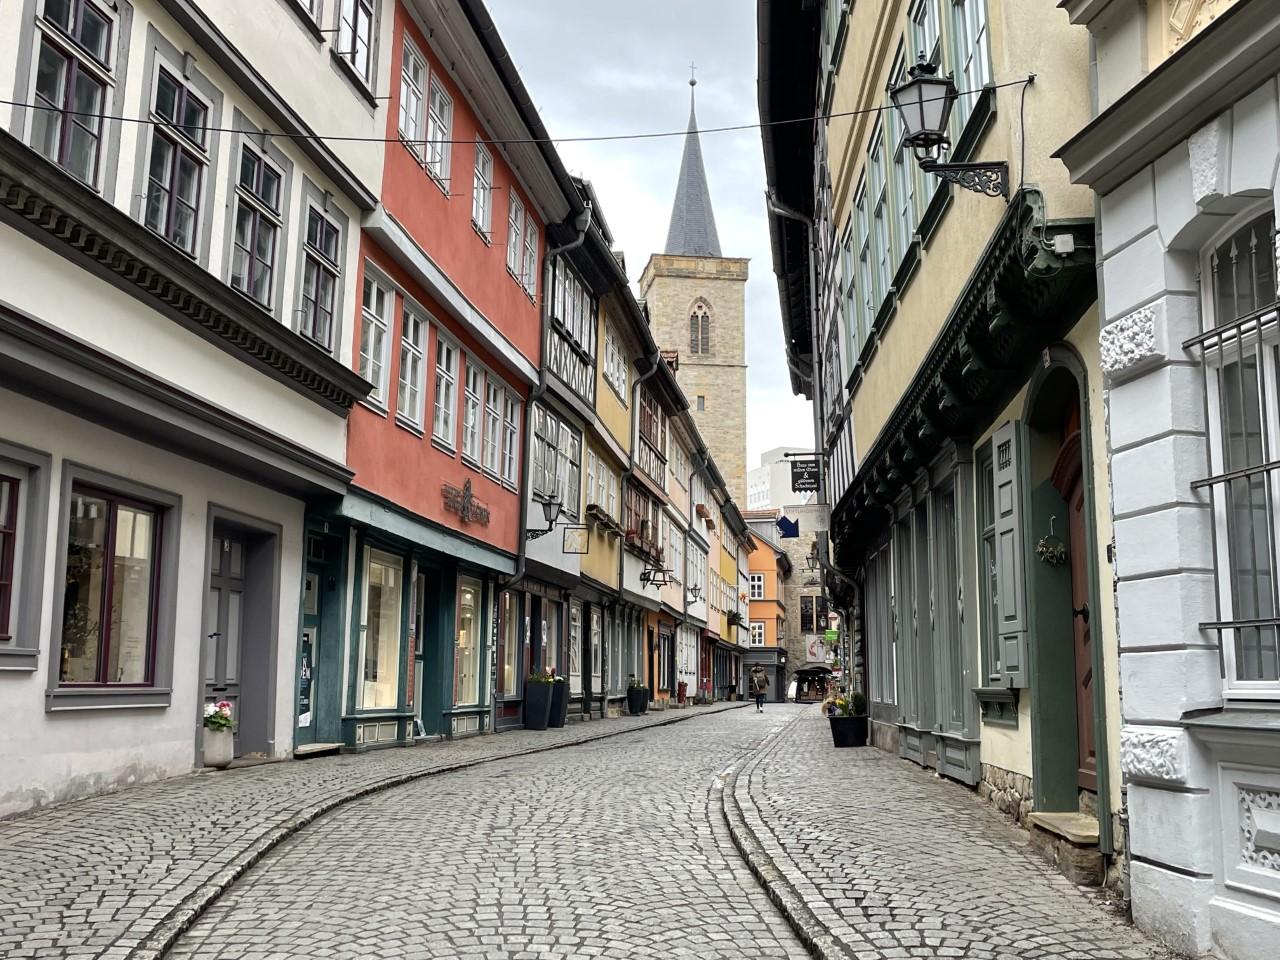 Photograph of a street in Erfurt, Germany.